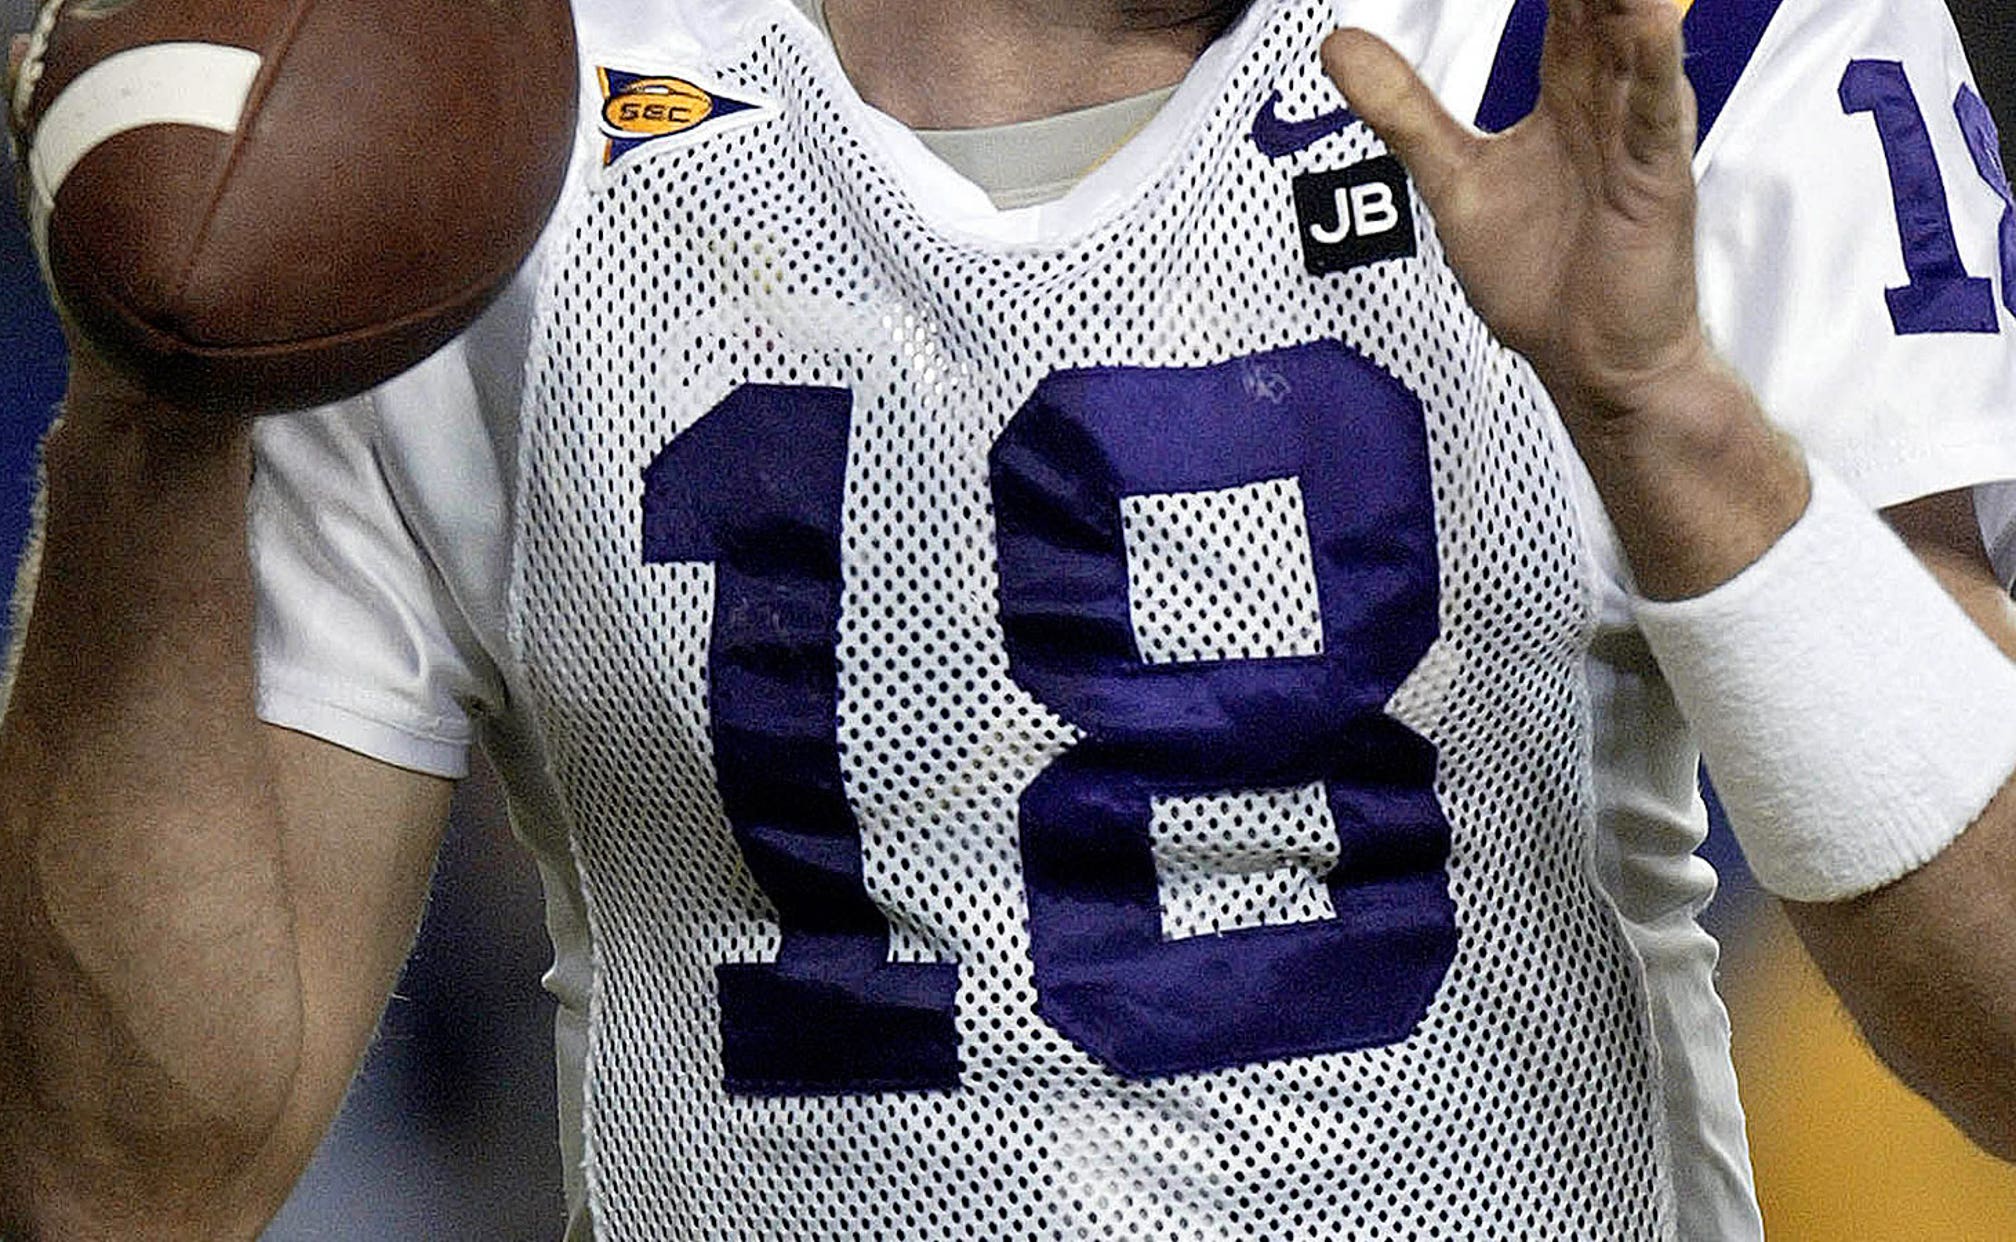 LSU reveals who will wear the honorable No. 18 jersey FOX Sports